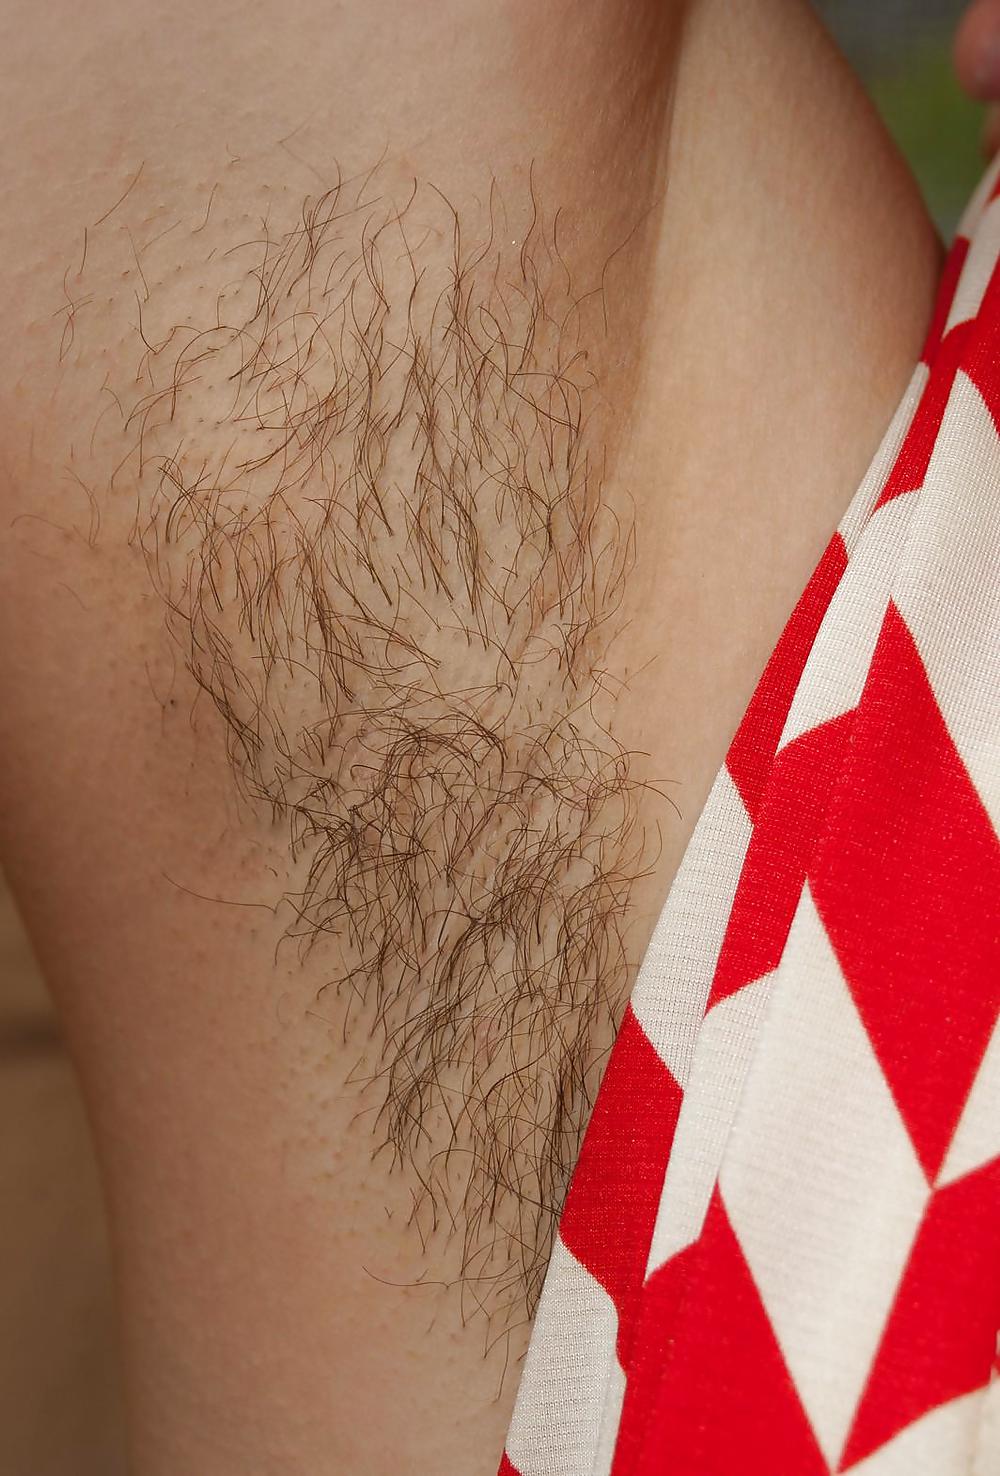 Miscellaneous girls showing hairy, unshaven armpits 2 #36246350